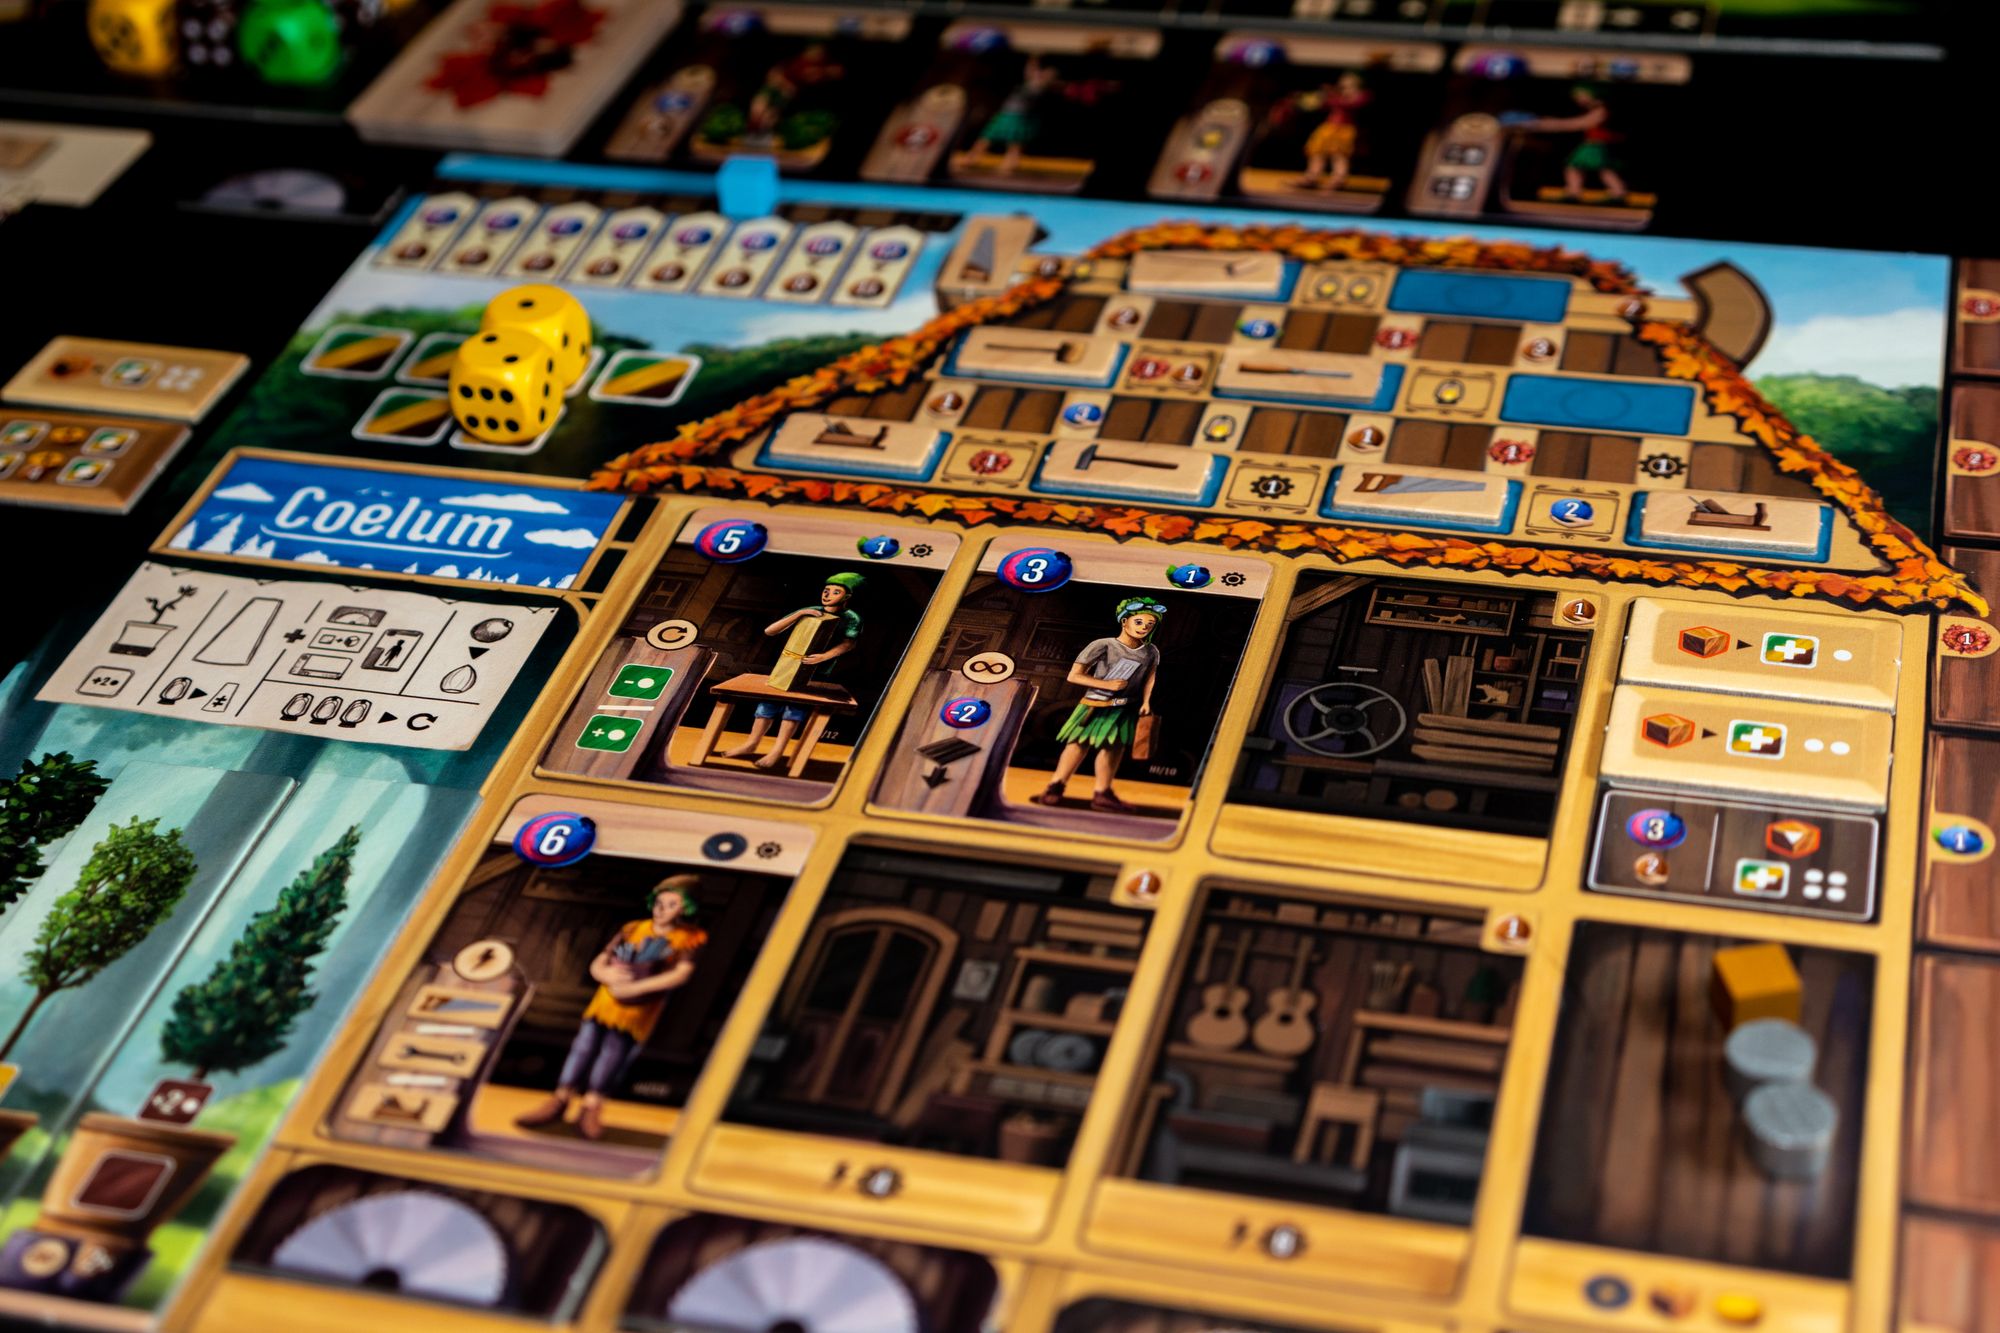 Review: Woodcraft